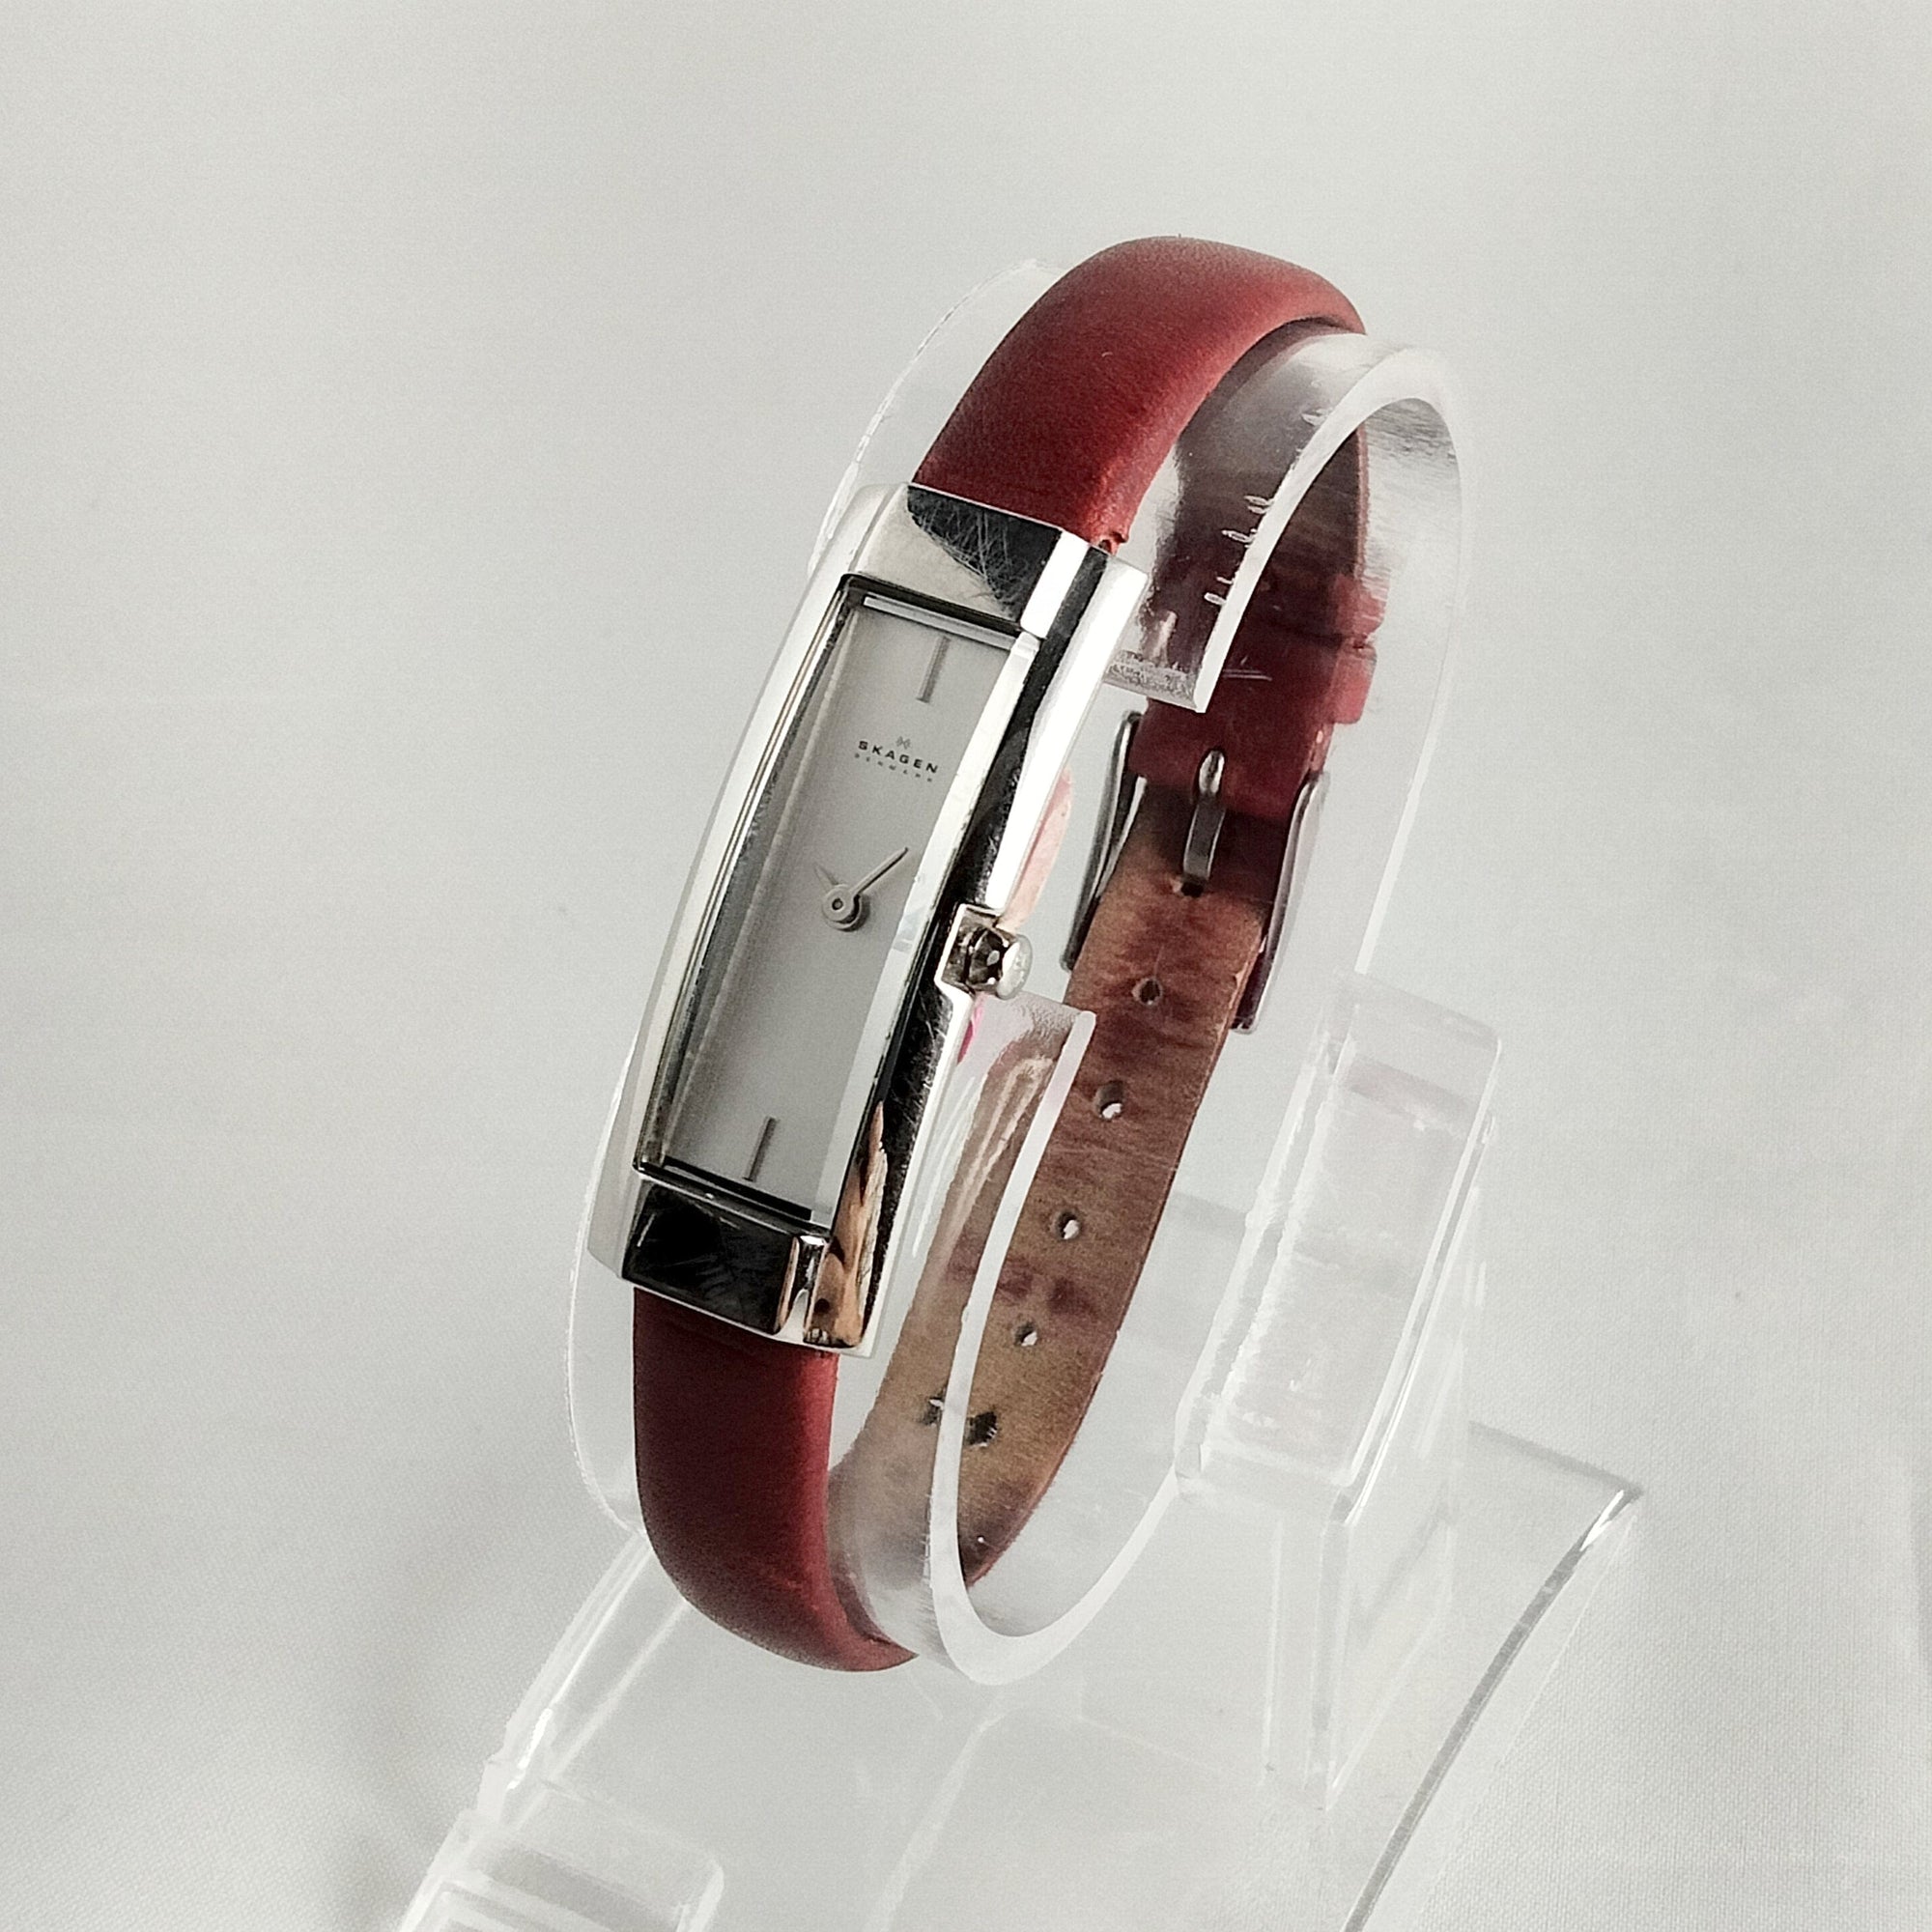 I Like Mikes Mid Century Modern Watches Skagen Women's Stainless Steel Watch, Rectangular Dial, Thin Red Genuine Leather Strap